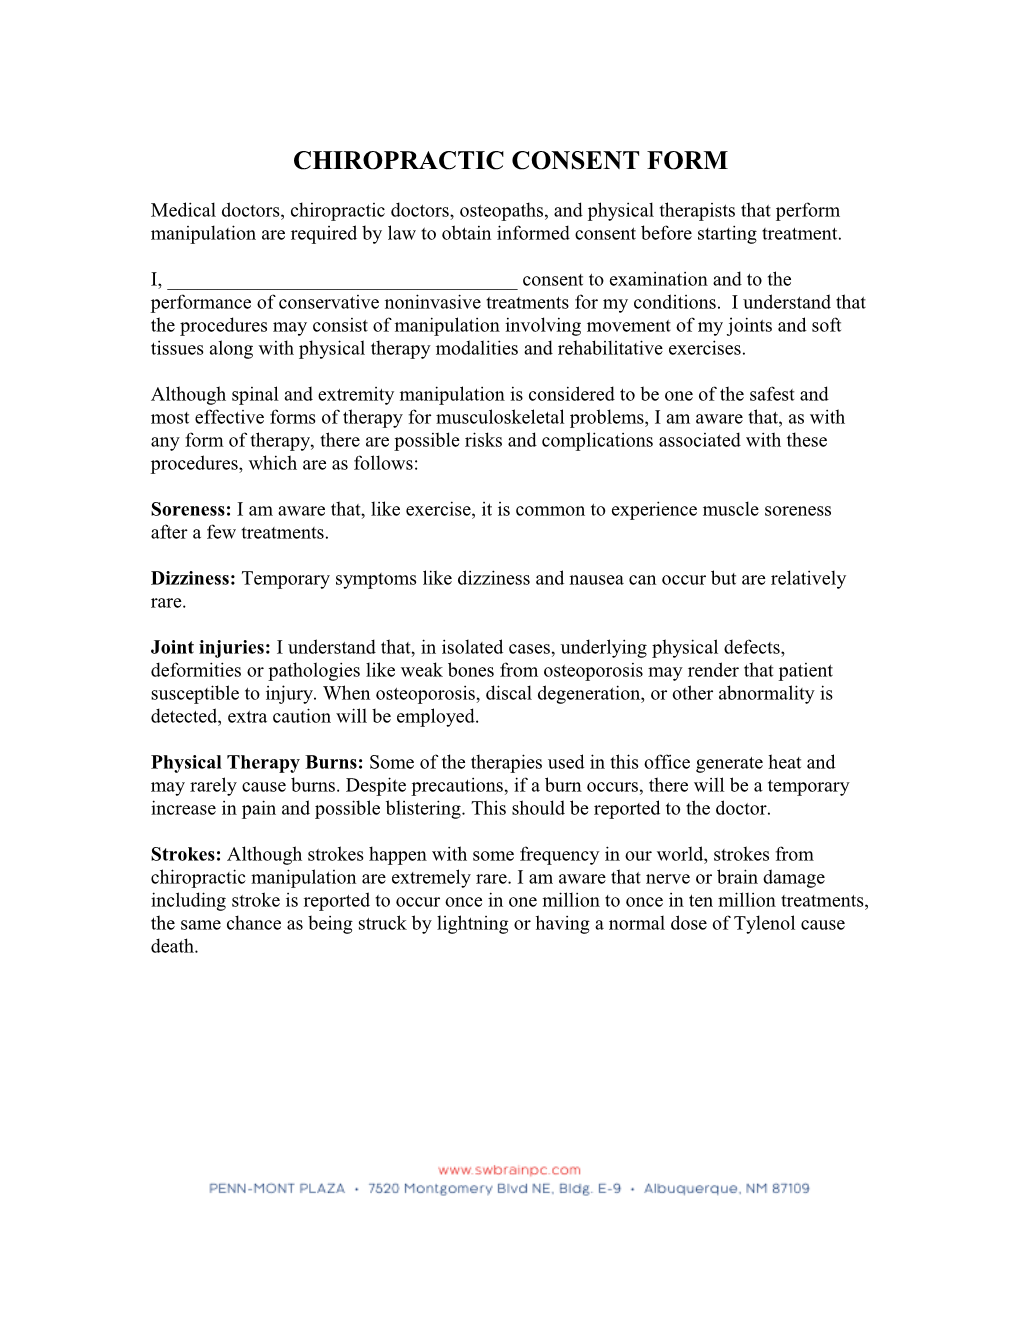 Chiropractic Consent Form